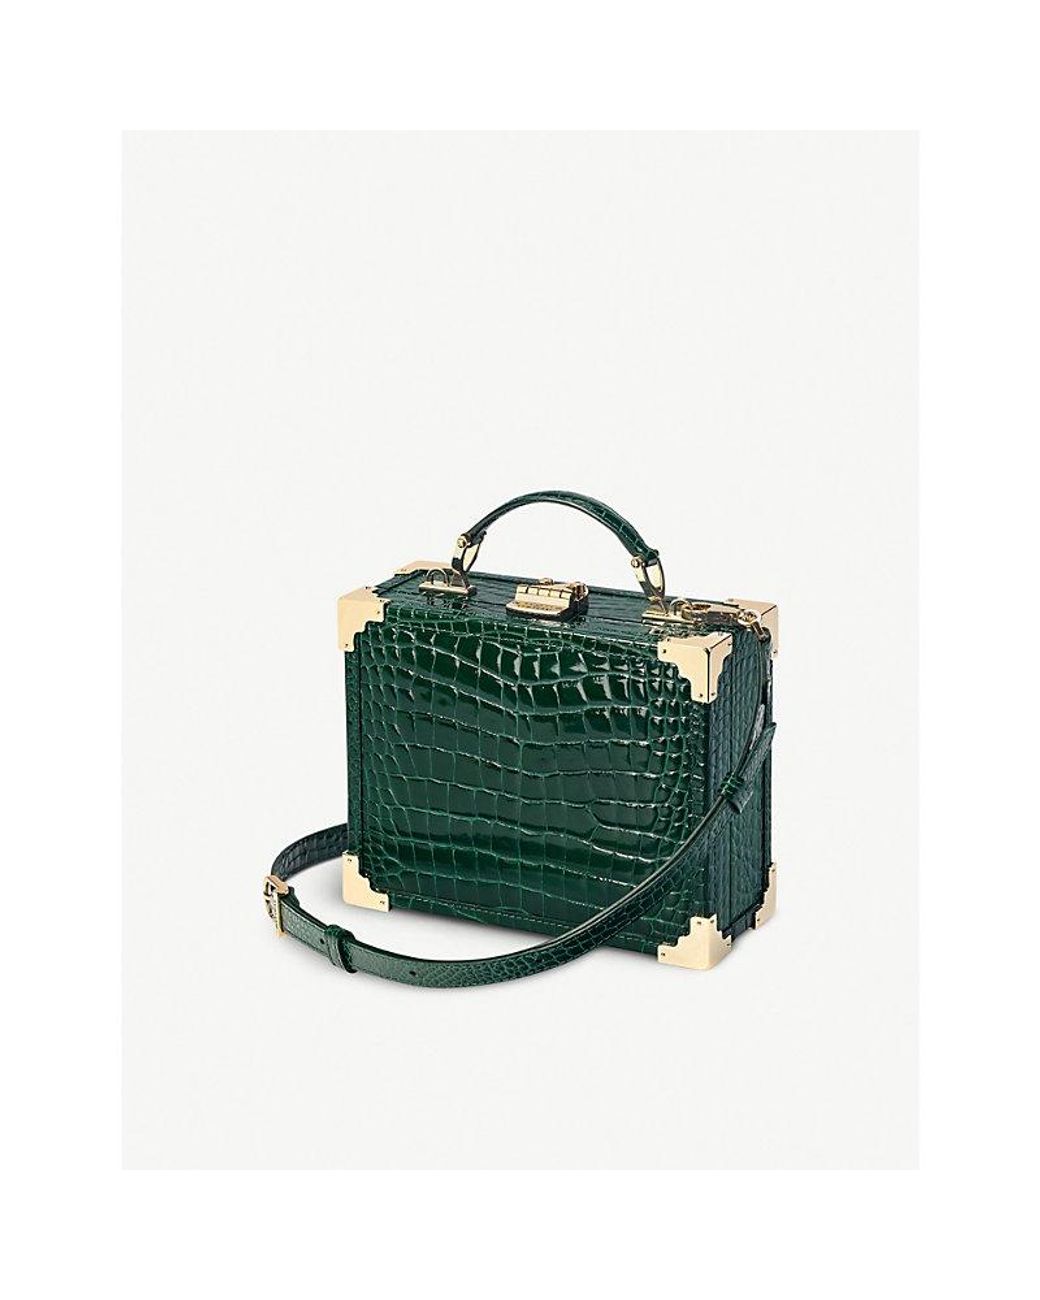 Aspinal of London Trunk Mini Croc-embossed Leather Clutch Bag in